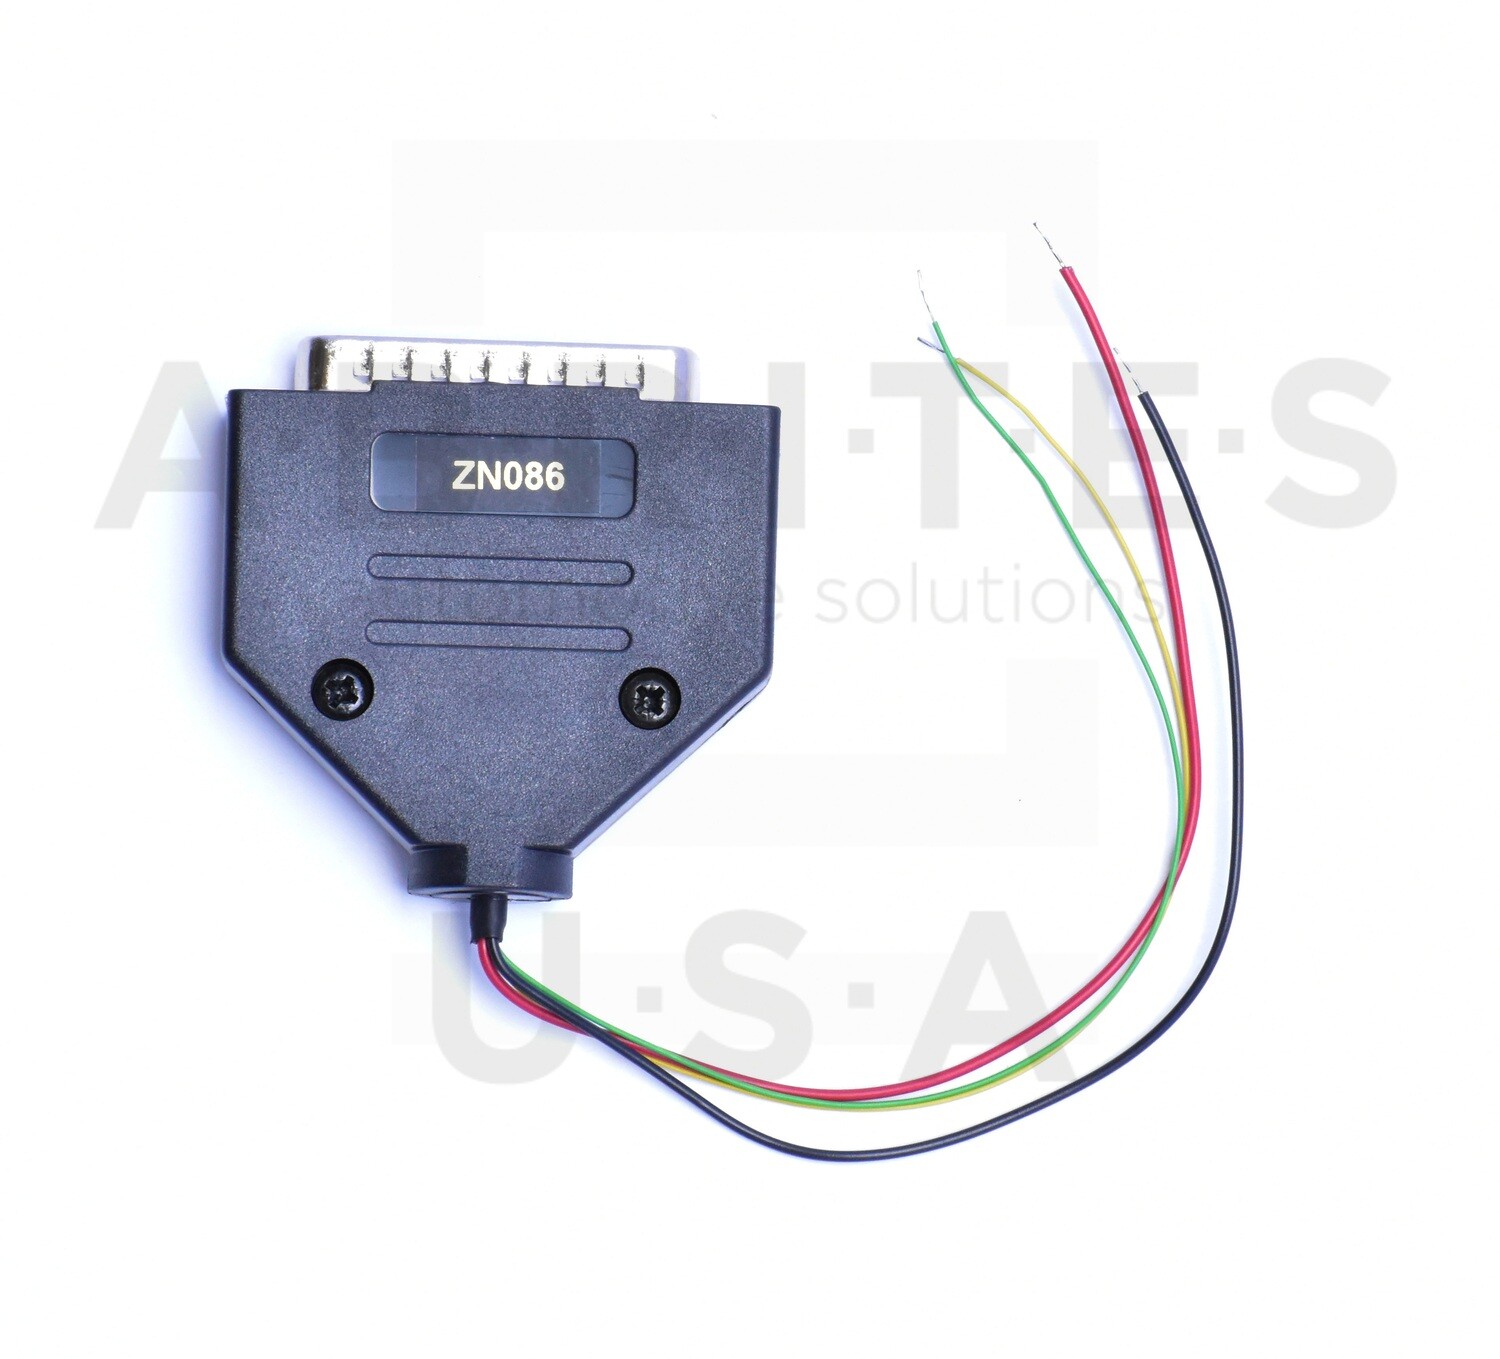 ZN086 - MC9S12 ADAPTER for ABPROG